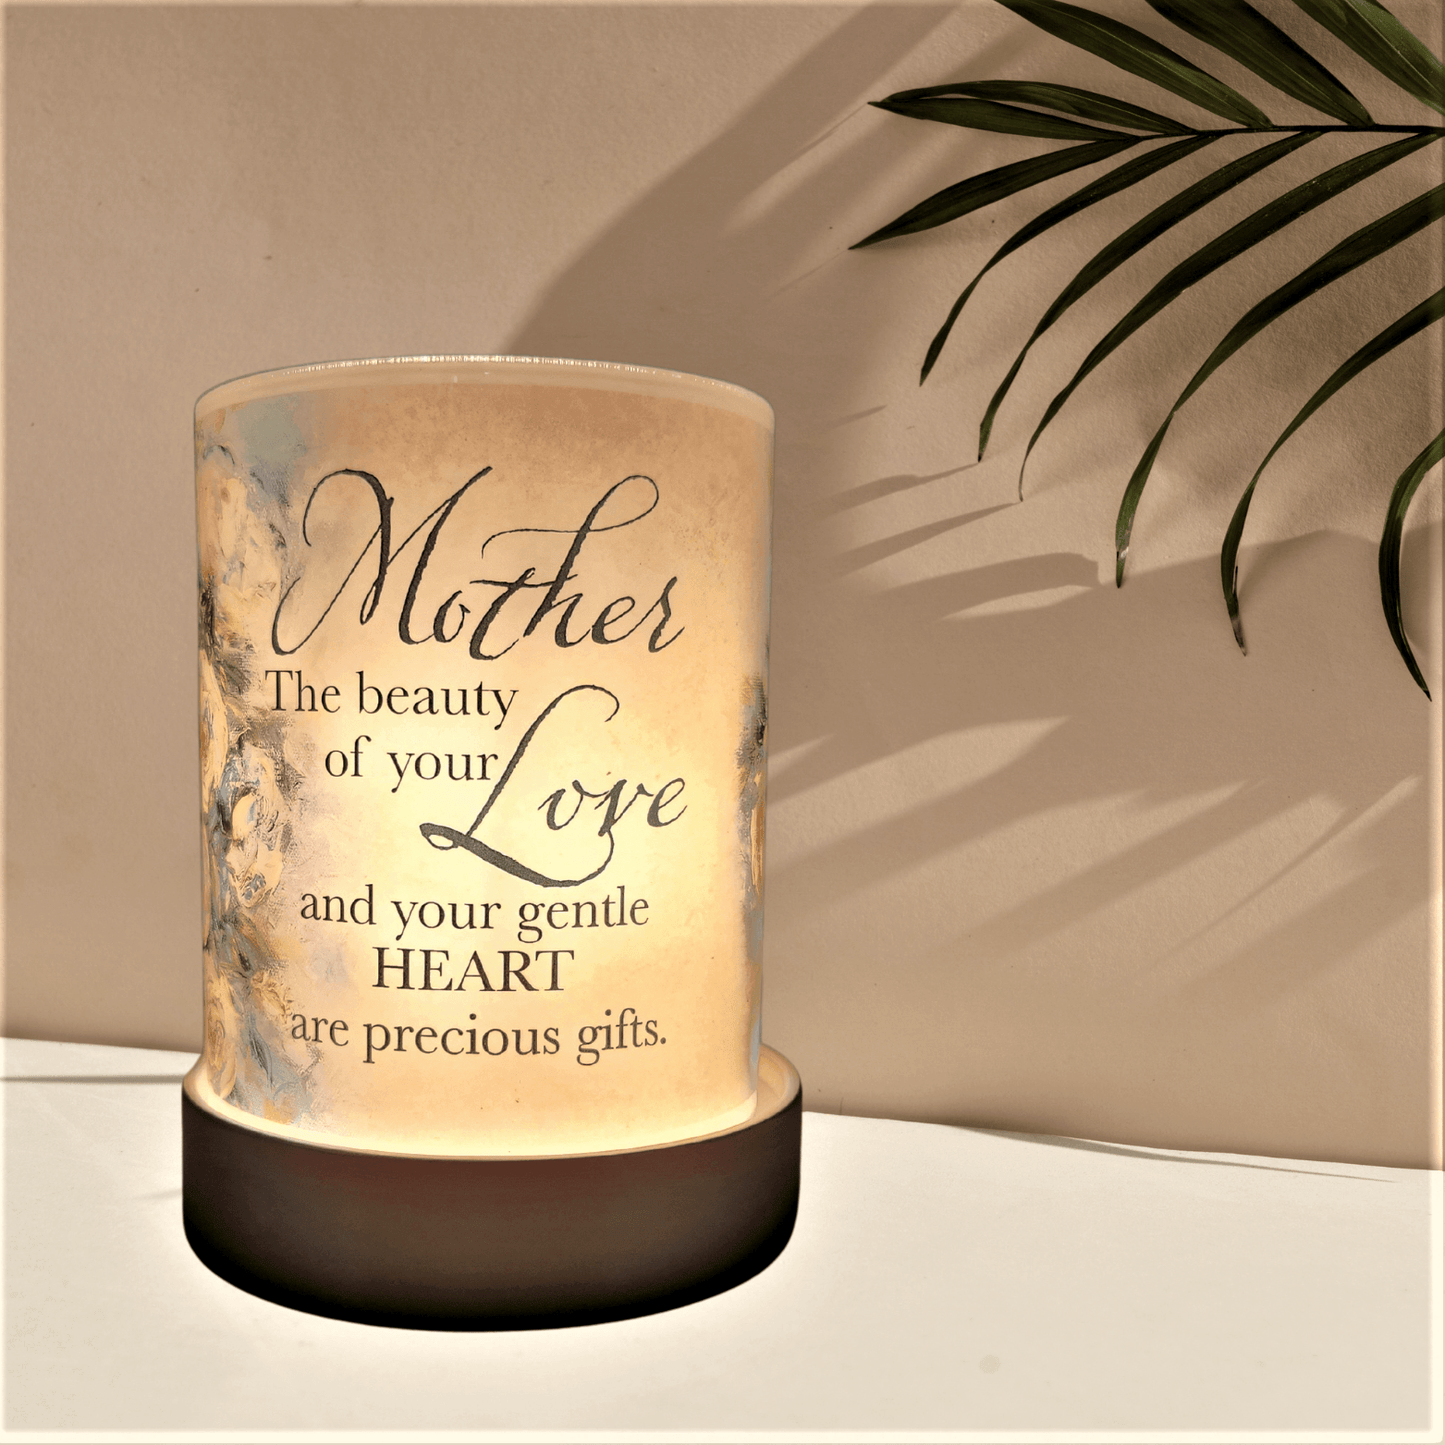 Mother The Beauty Of Your Love Warmer - WaxettyMother The Beauty Of Your Love WarmerWax Warmer